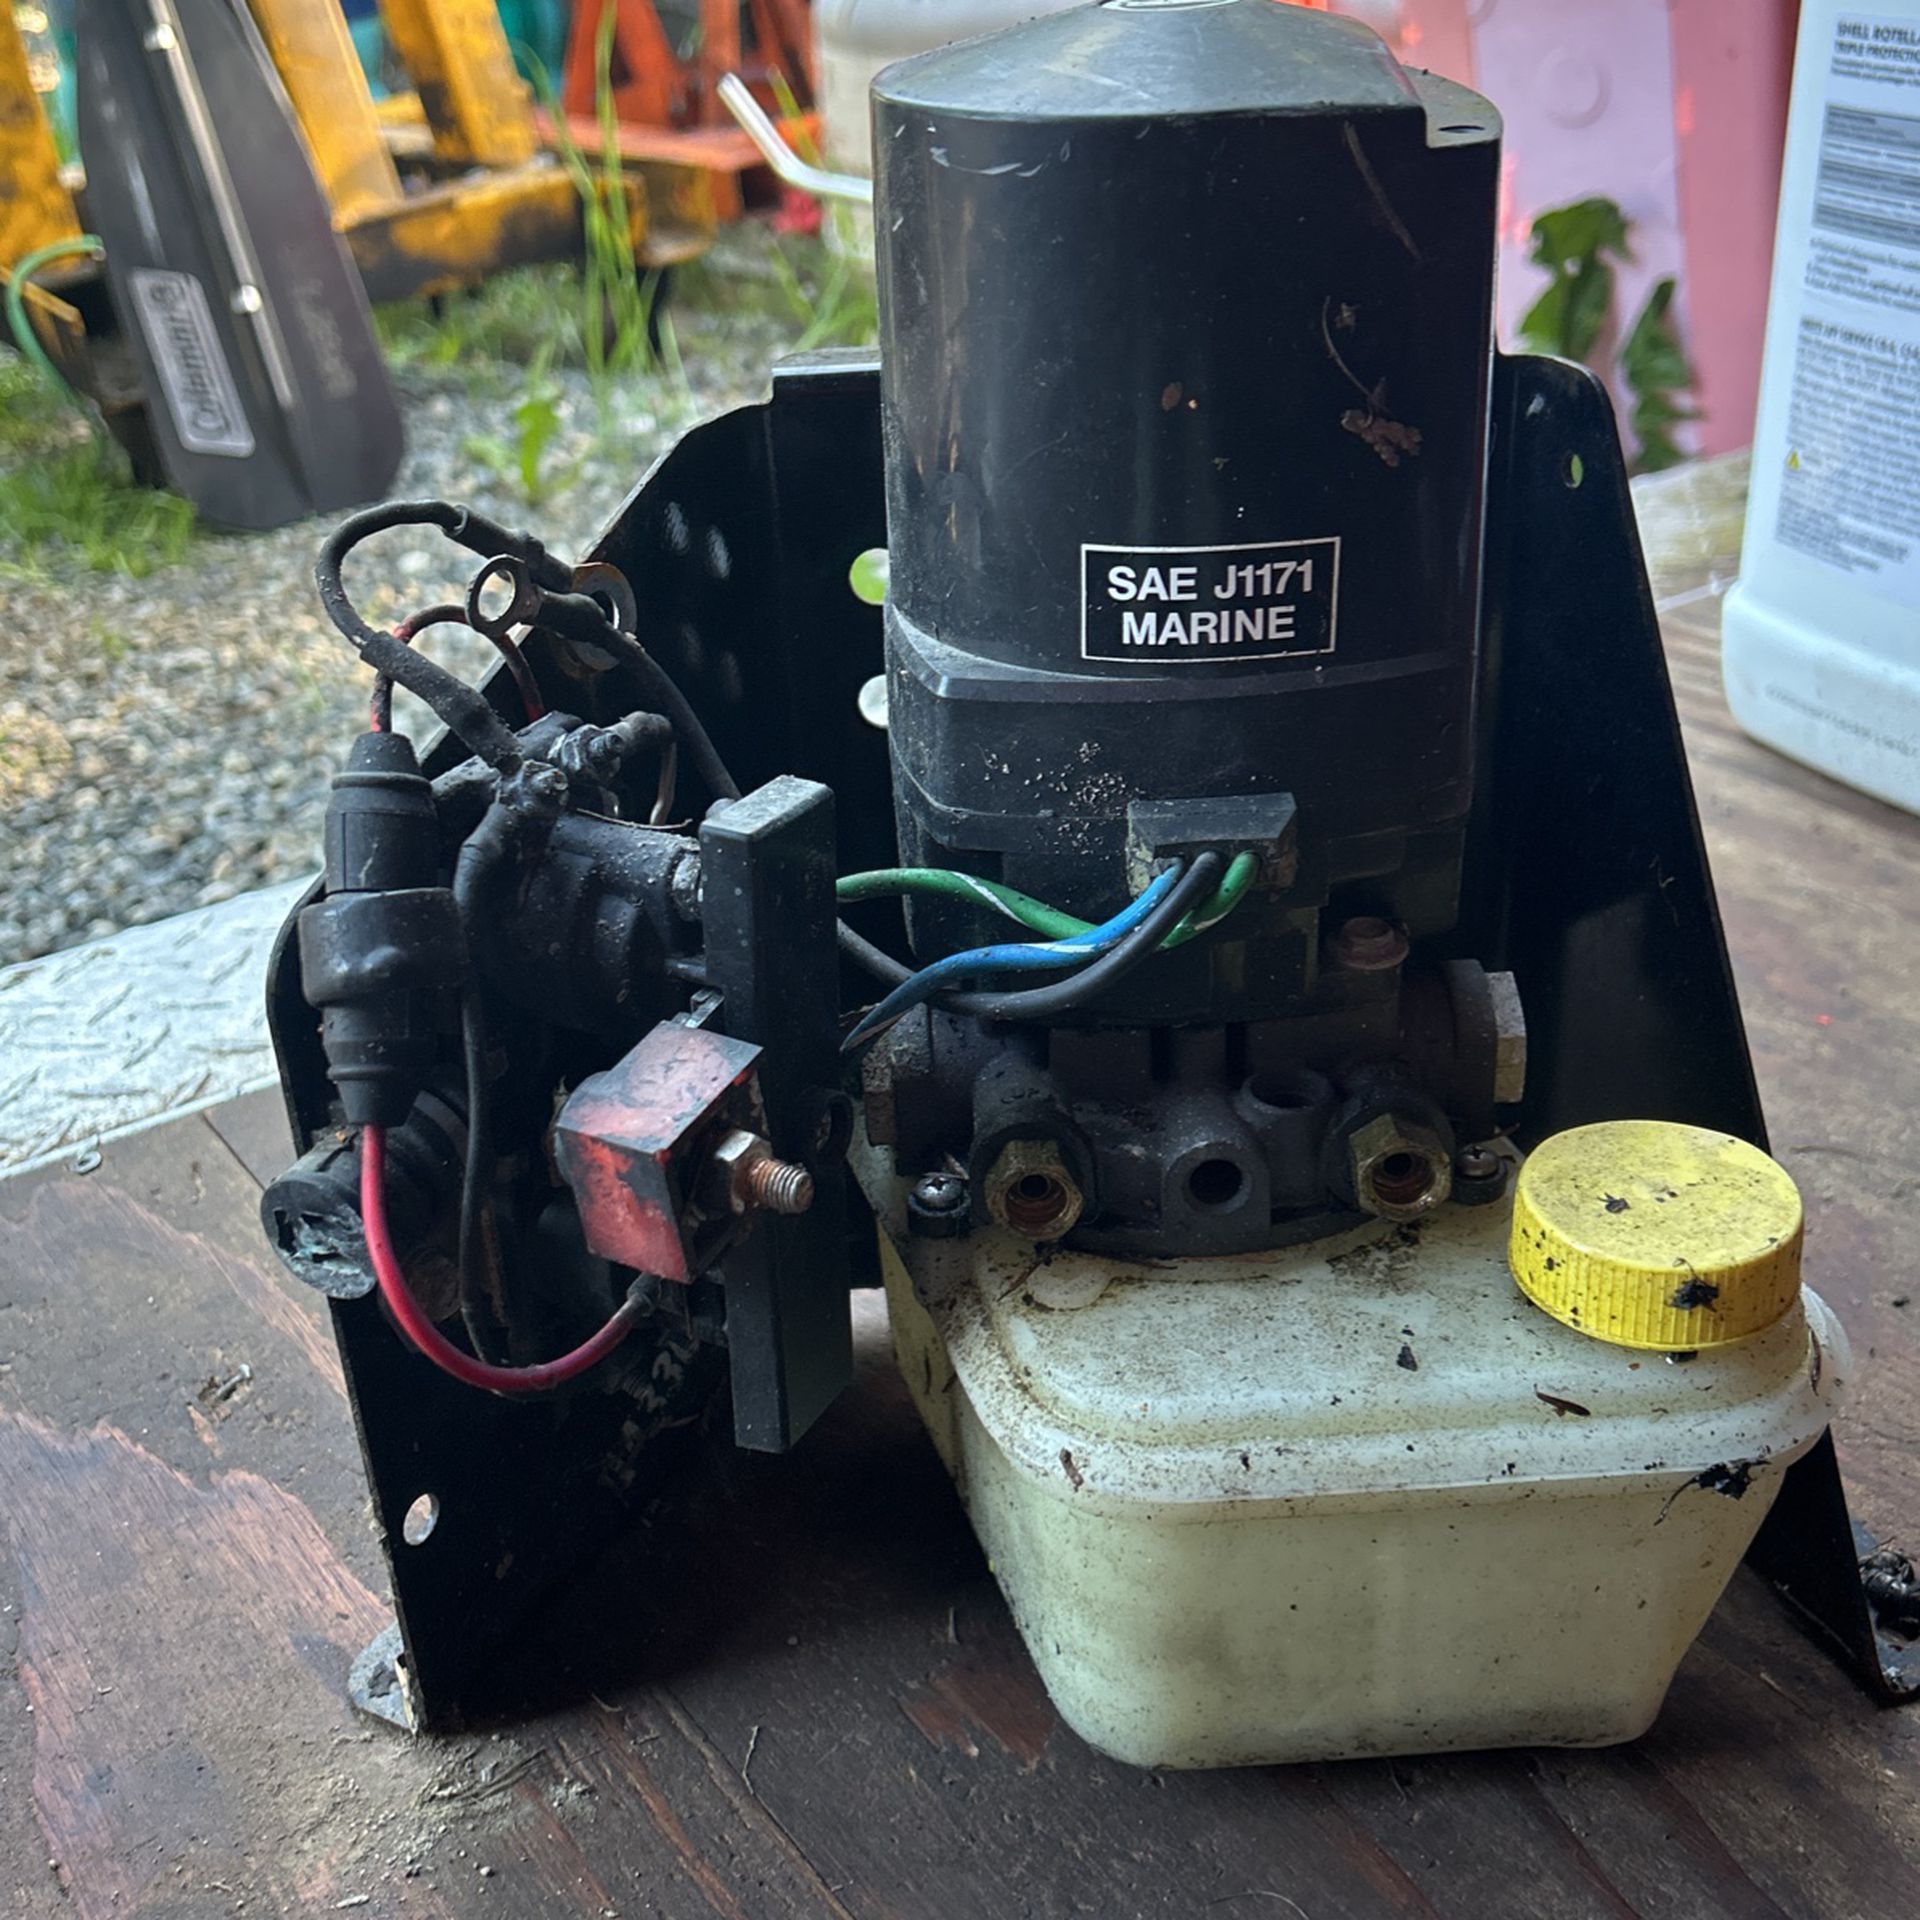 1989 Sea Ray Hydraulics Pump In Working Order Also Have A Bravo Outdrive Available Both Used In Working Condition Came Off Parts Boat 